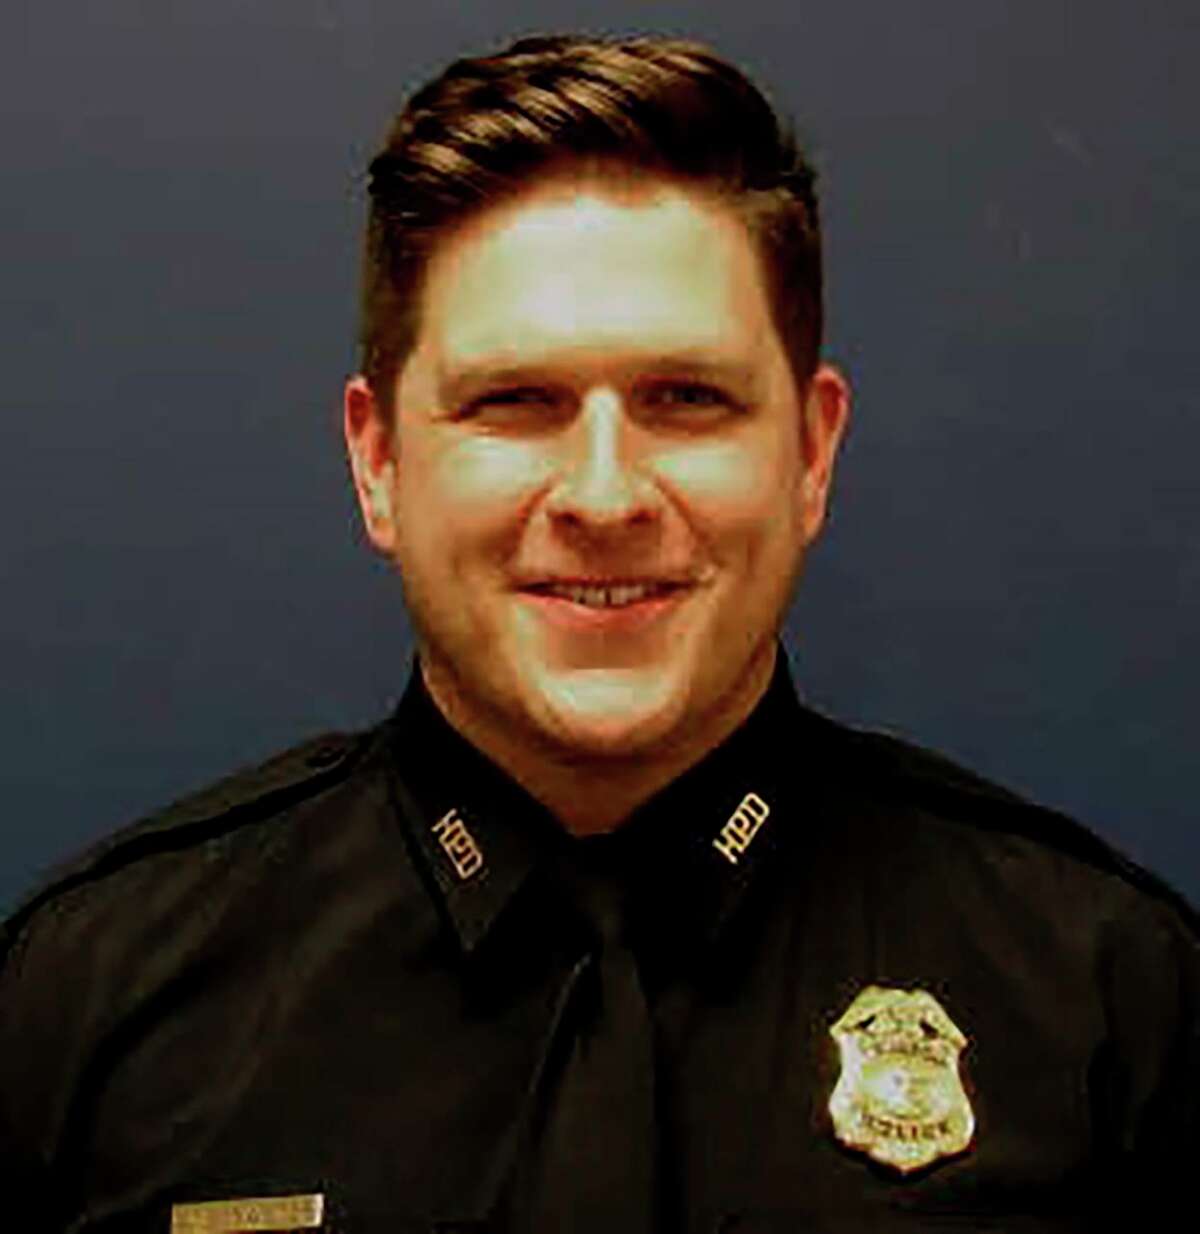 Christopher Brewster, a 32-year-old sergeant with the Houston Police Department, was gunned down while investigating a domestic disturbance in the city’s East End on Saturday, Dec. 7, 2019. Chron.com compiled the need-to-know information about the case in the gallery above, based on reporting from the Houston Chronicle, or information provided the Houston Police Department. >>>